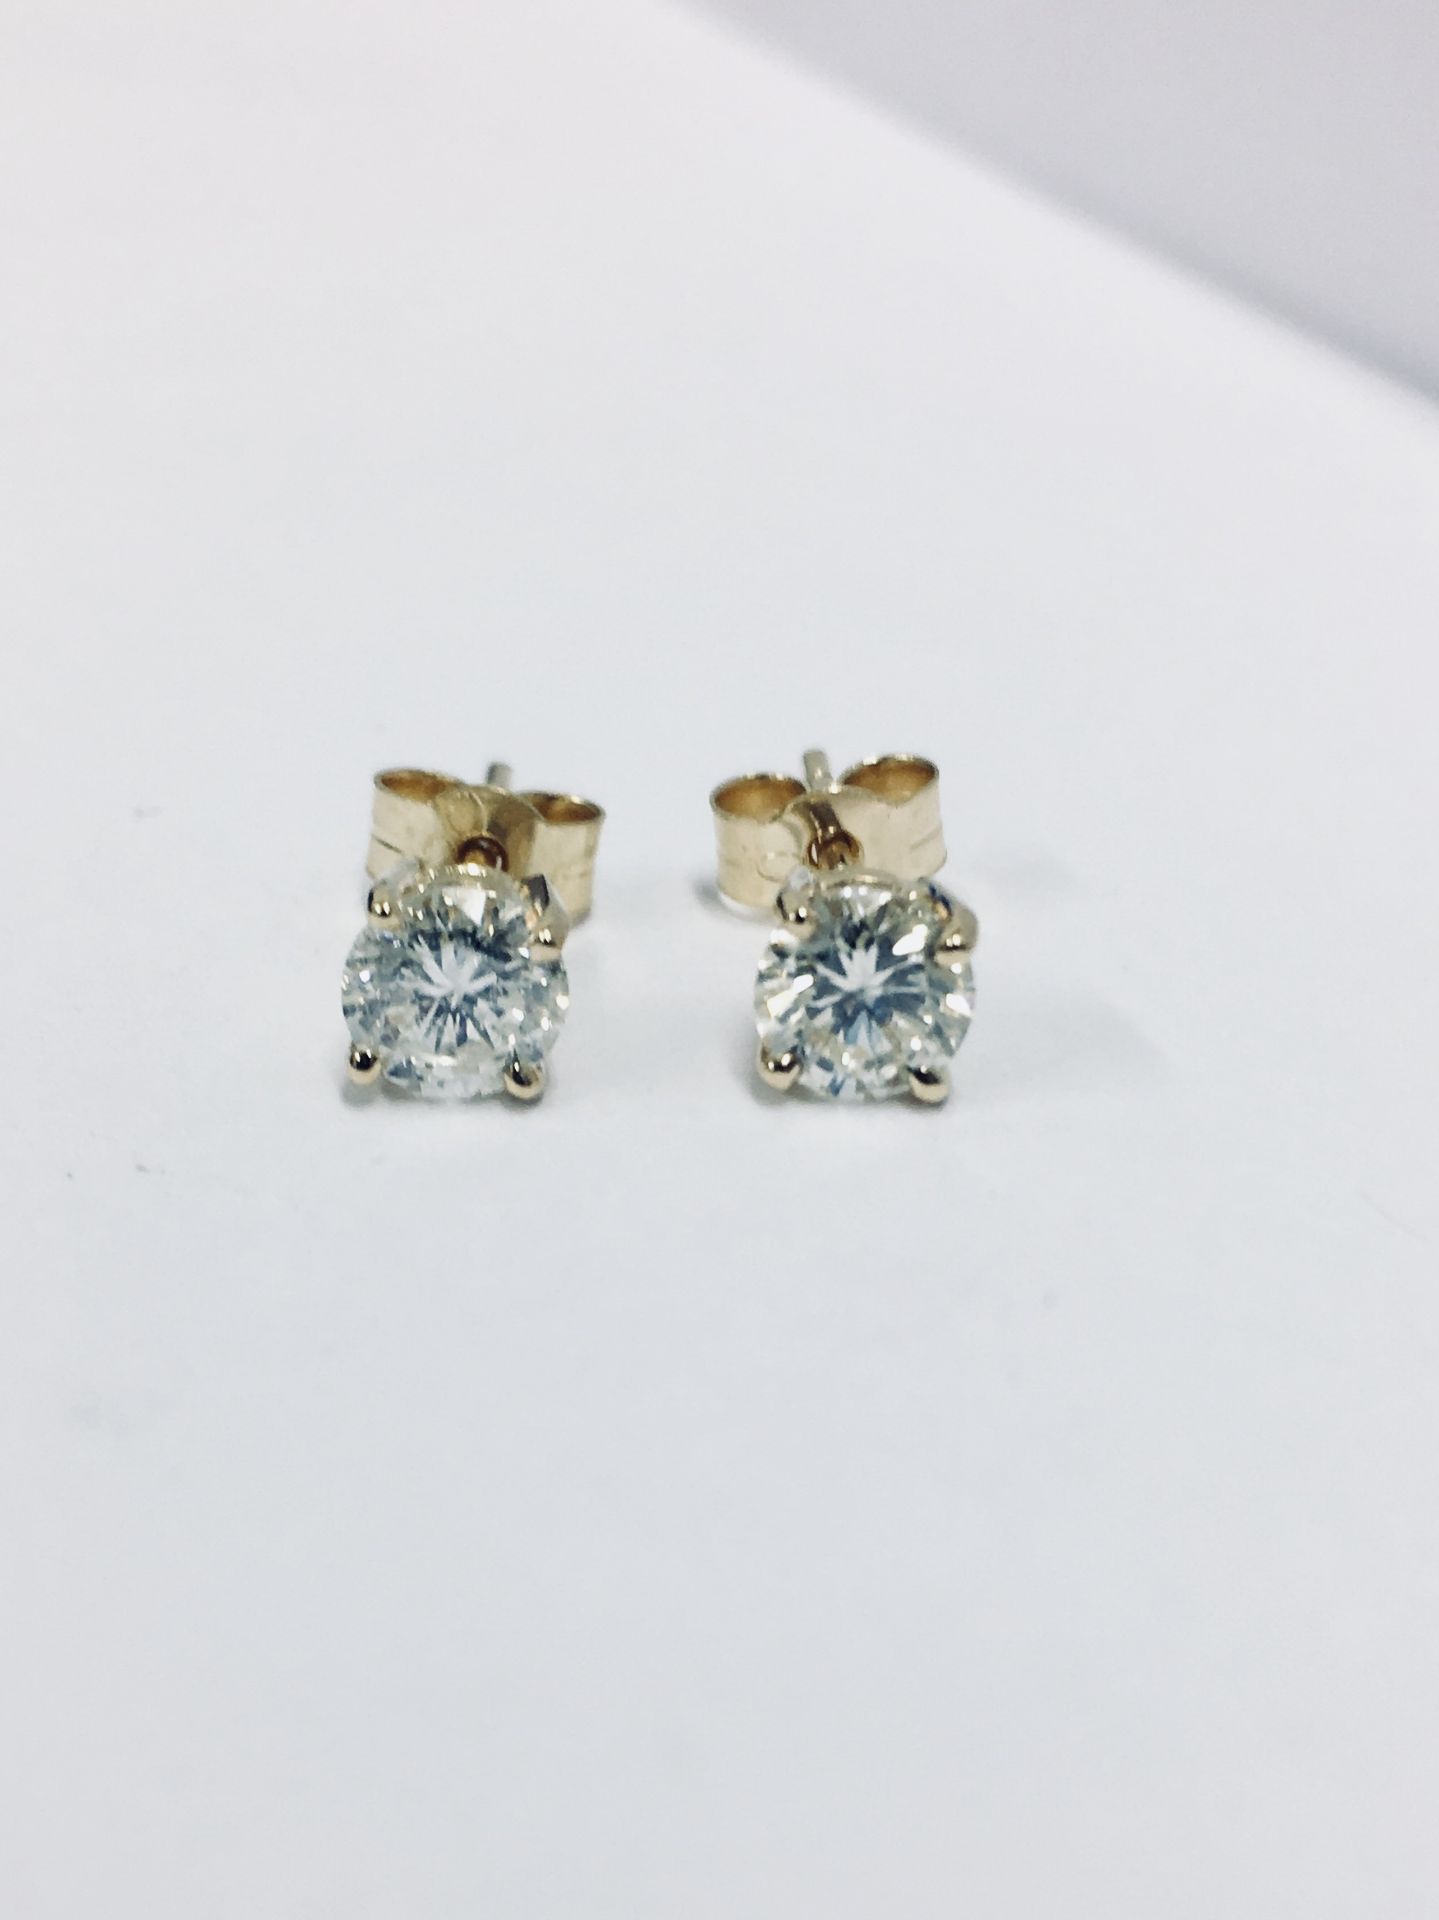 1.00ct diamond solitaire earrings set in 18ct yellow gold. 2 x brilliant cut diamonds, 0.50ct (